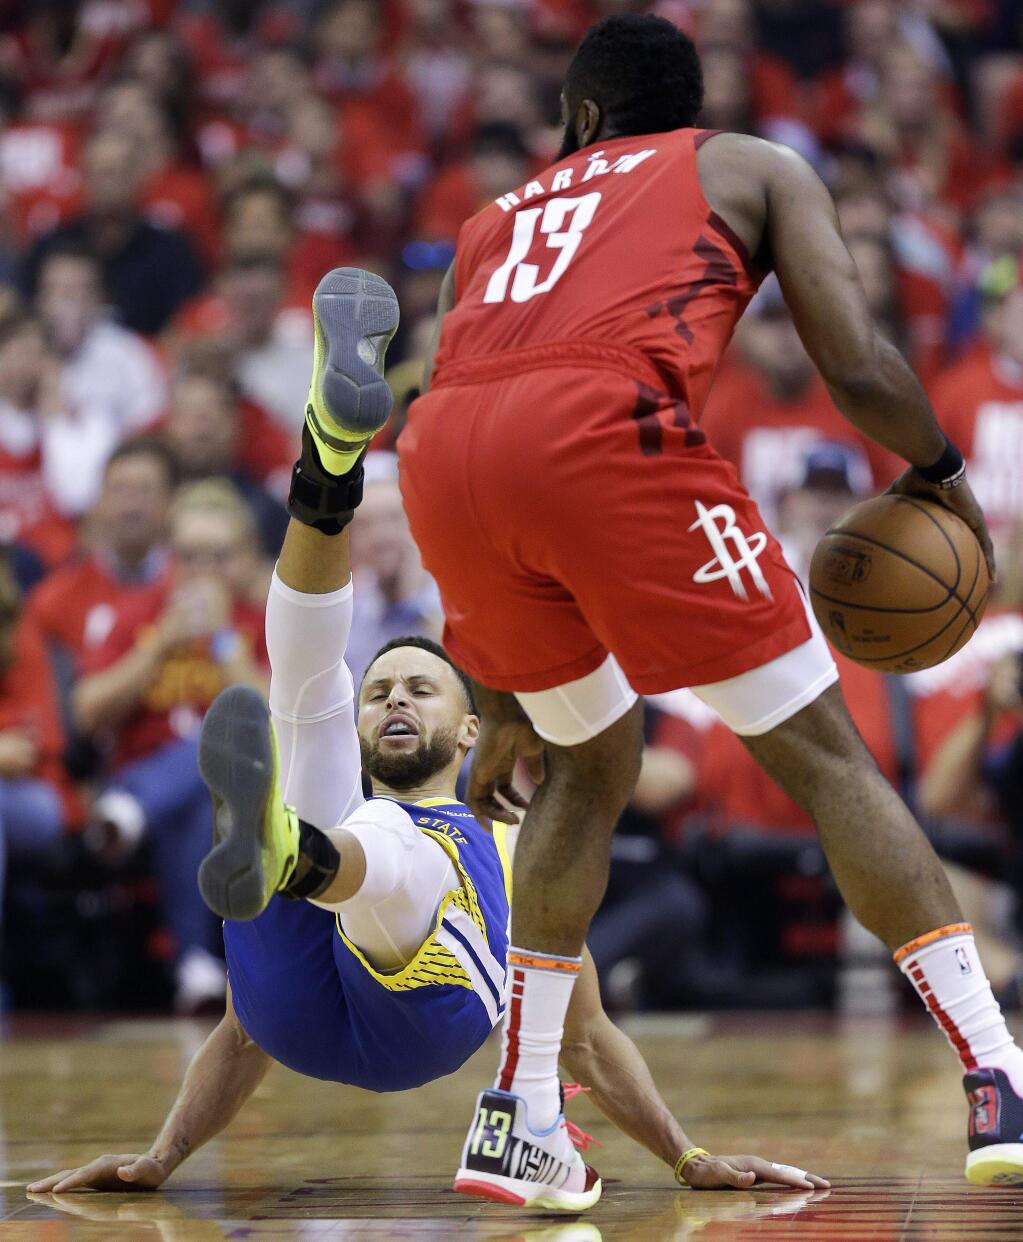 Golden State Warriors guard Stephen Curry, left, falls down after being bumped by Houston Rockets guard James Harden during the first half of Game 4 of a second-round NBA basketball playoff series, Monday, May 6, 2019, in Houston. (AP Photo/Eric Christian Smith)